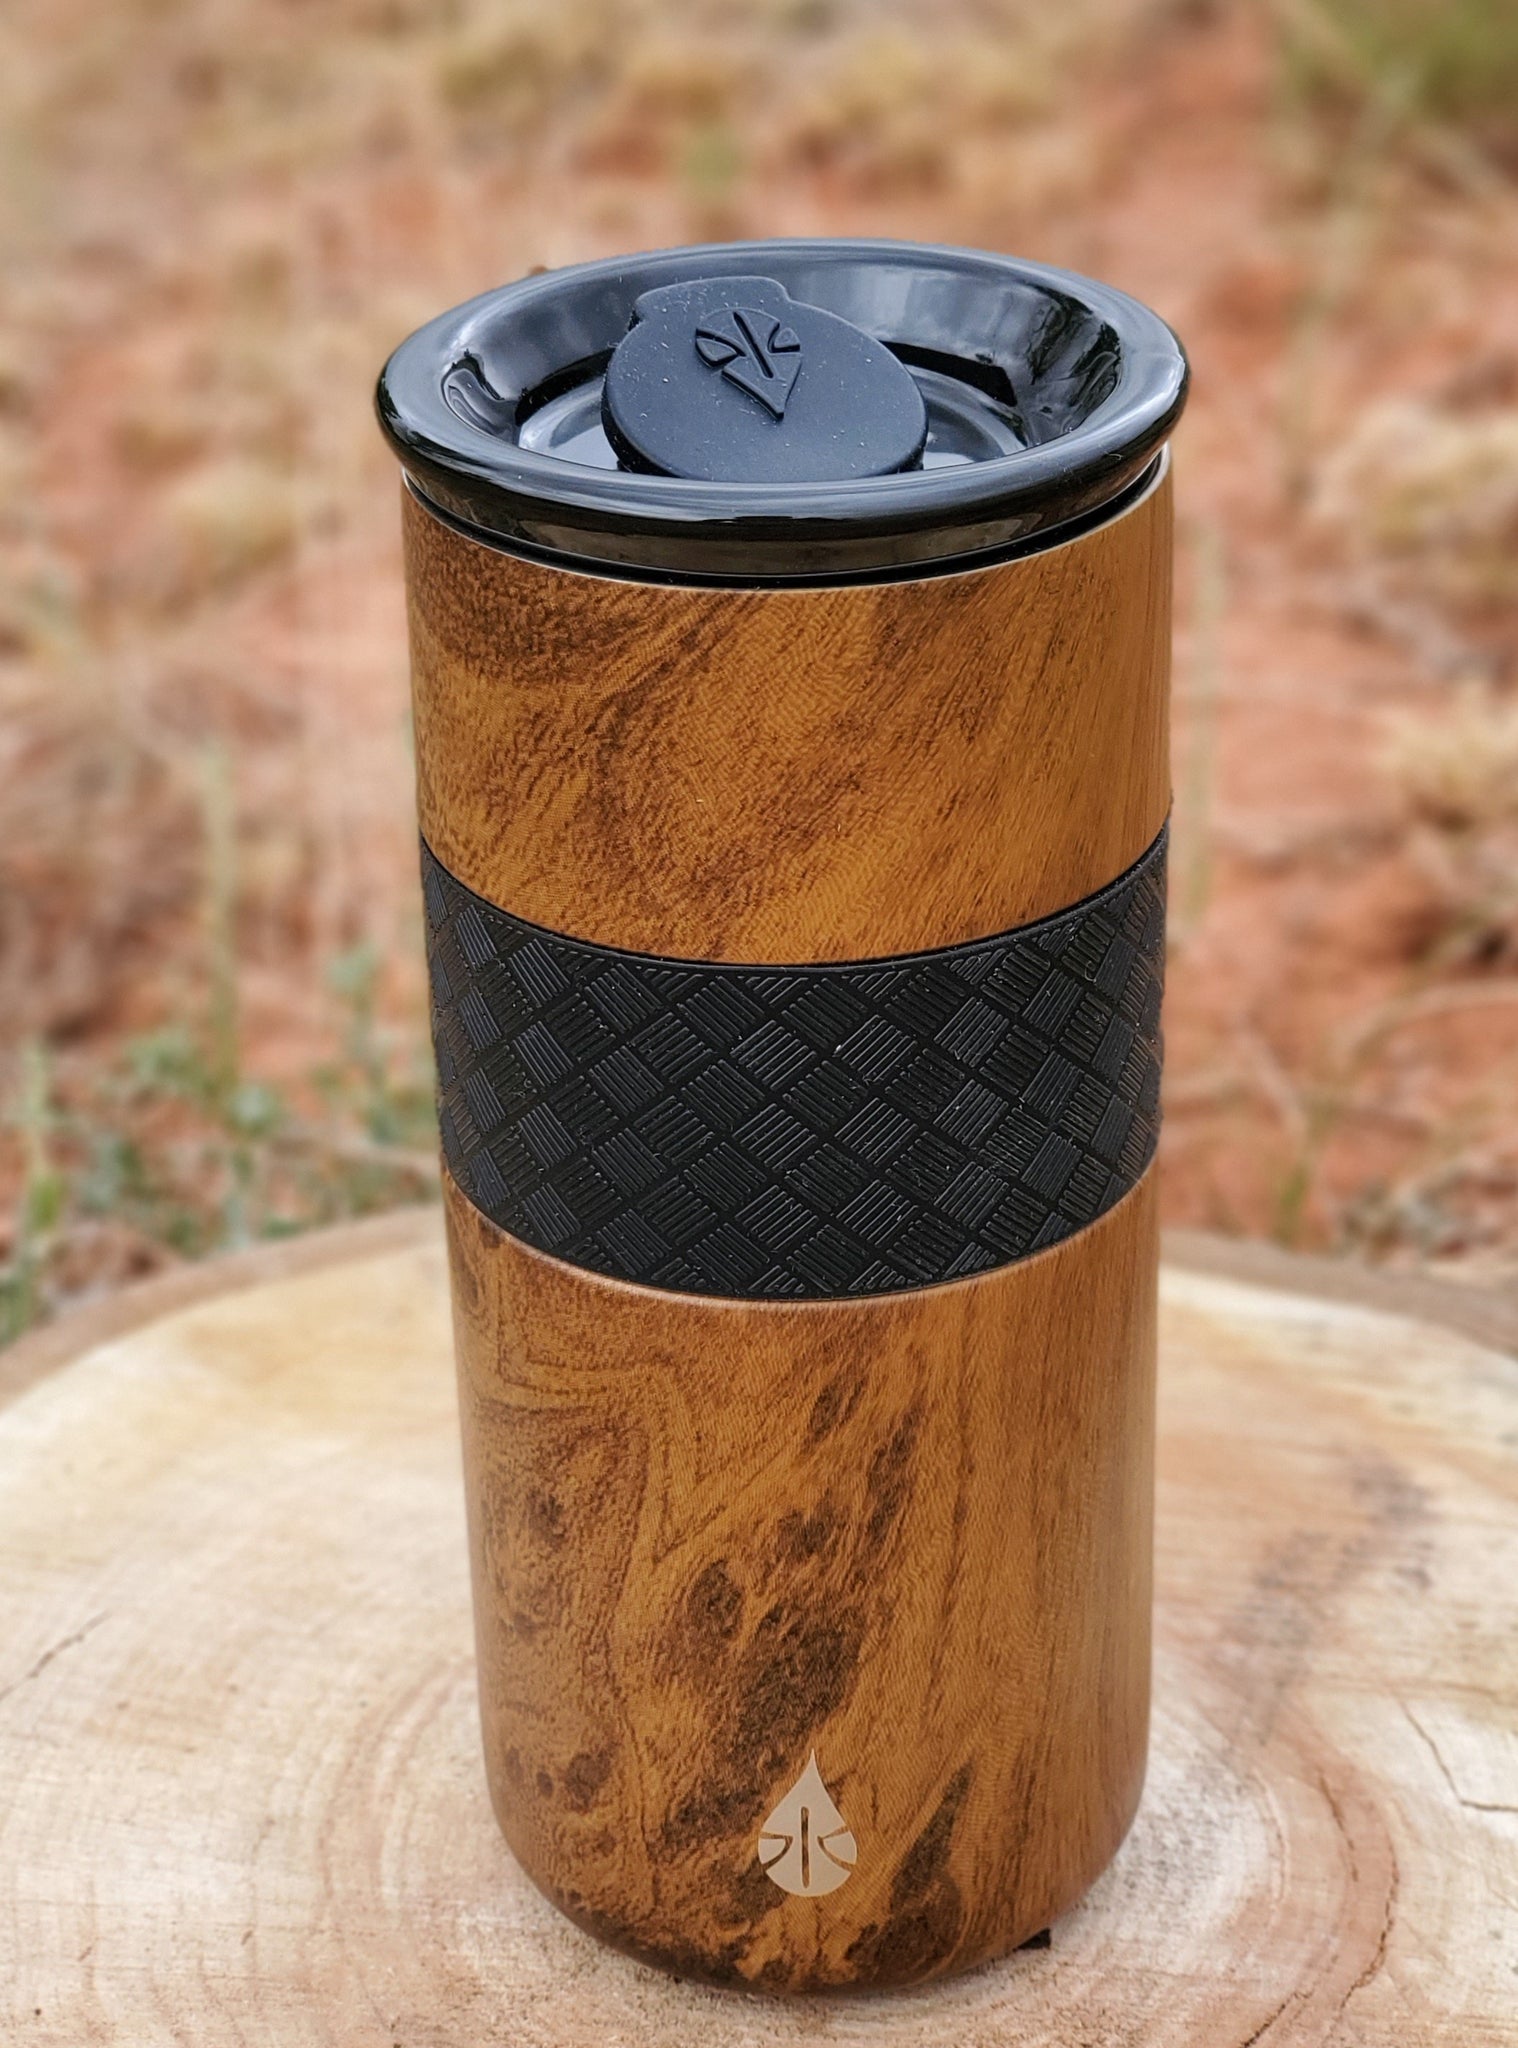 Teakwood Tumbler with Straw – S'well